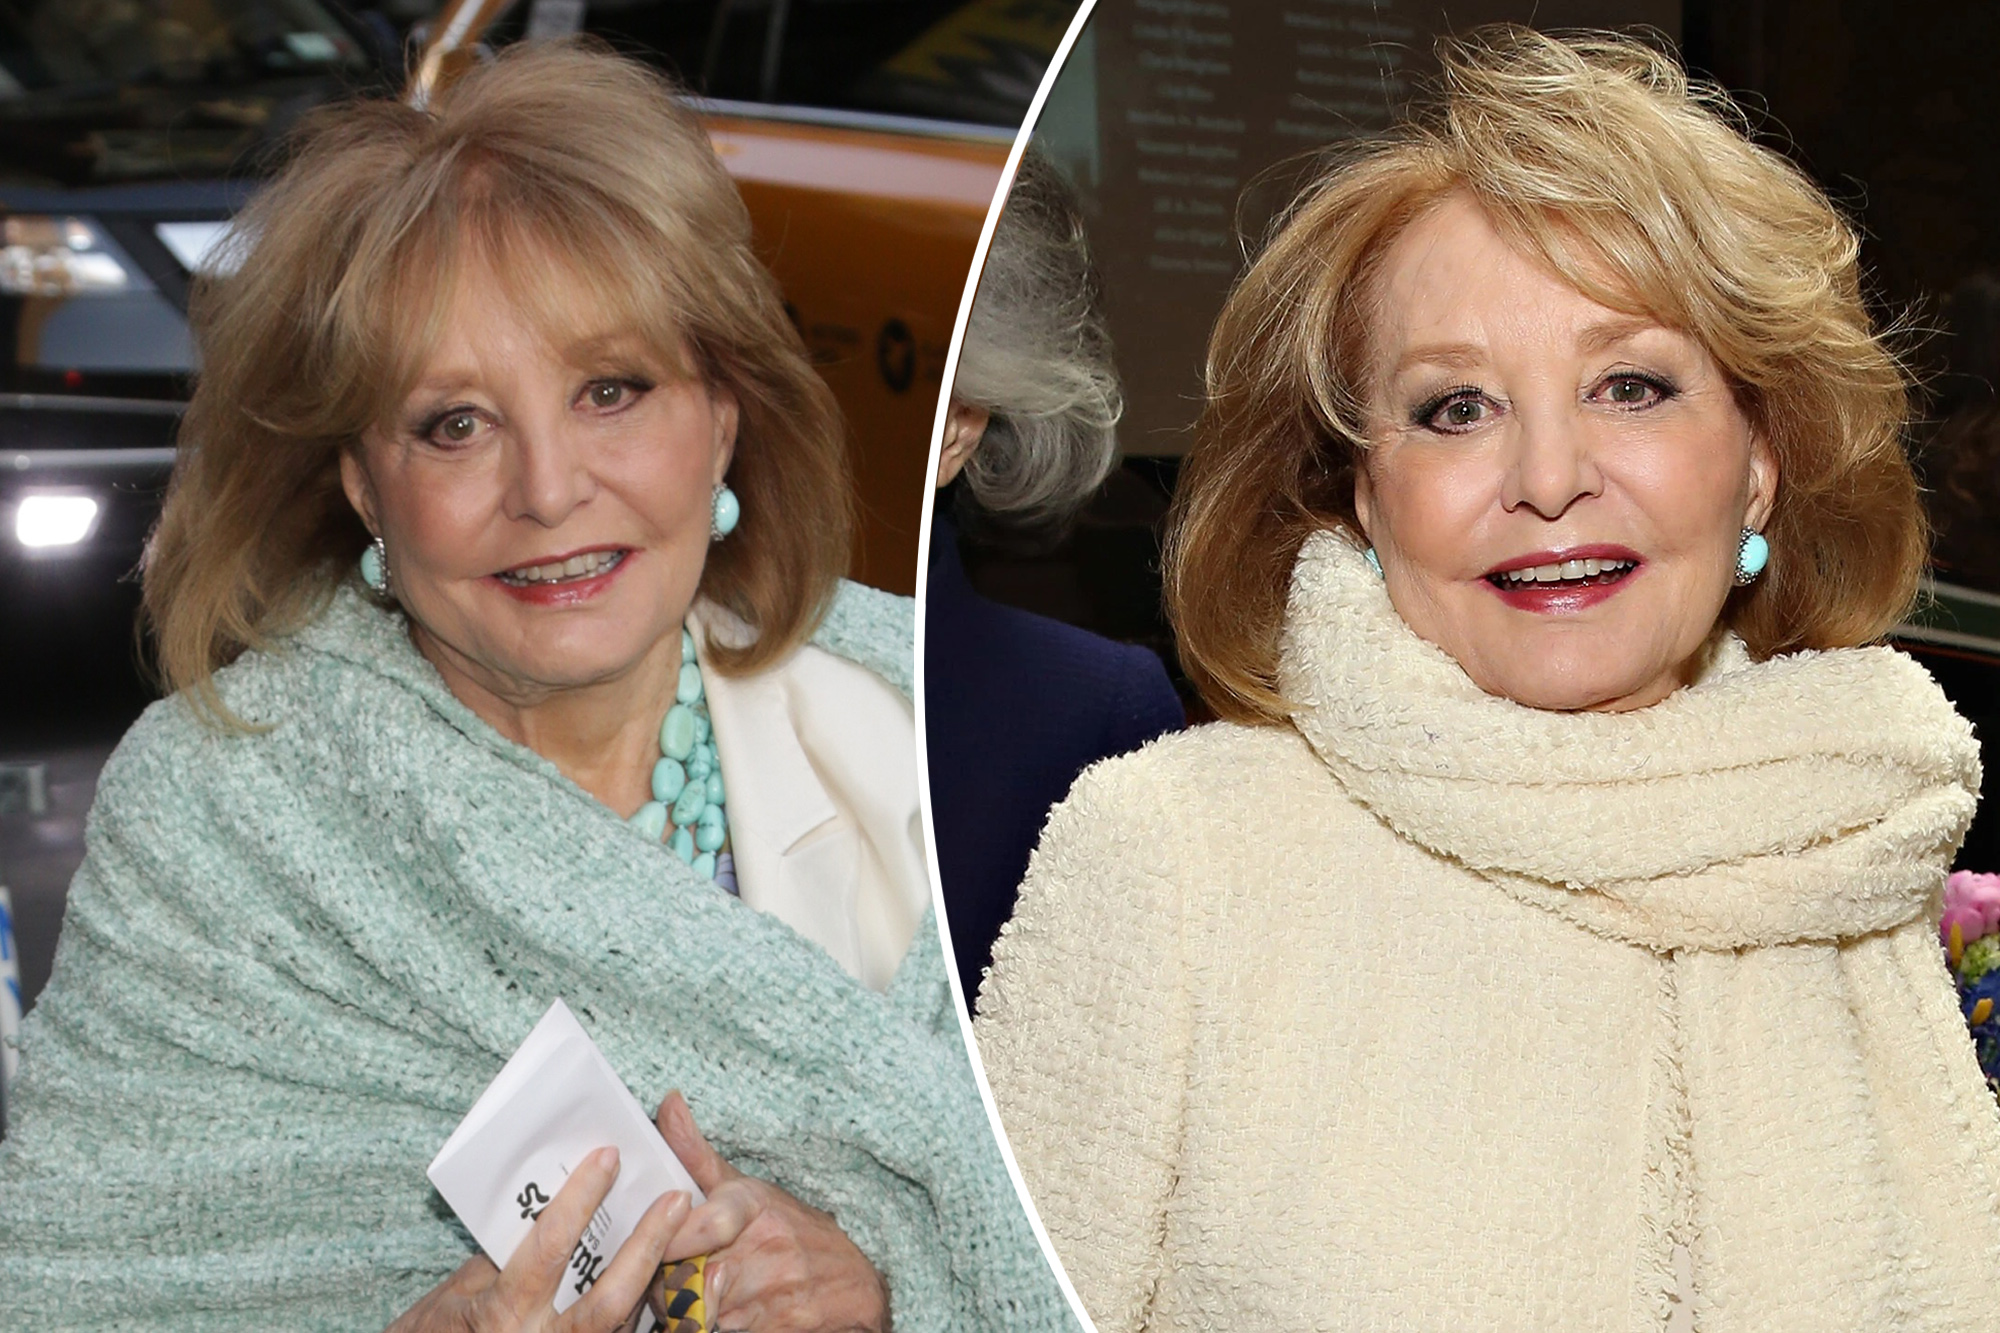 Barbara walters made final public appearance years before death